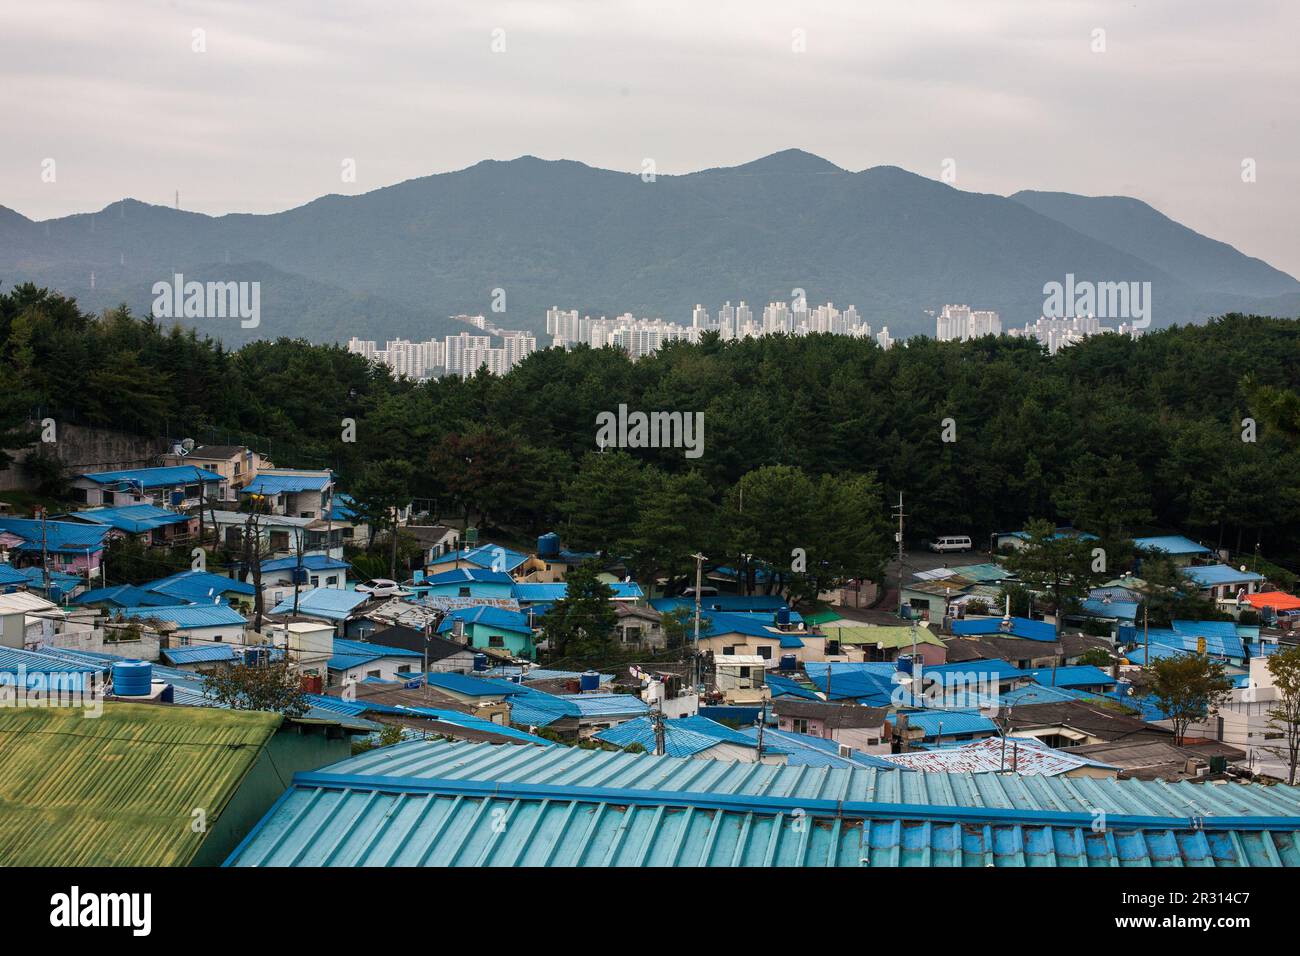 Blue-roofed poor hillside village and Apartment Stock Photo